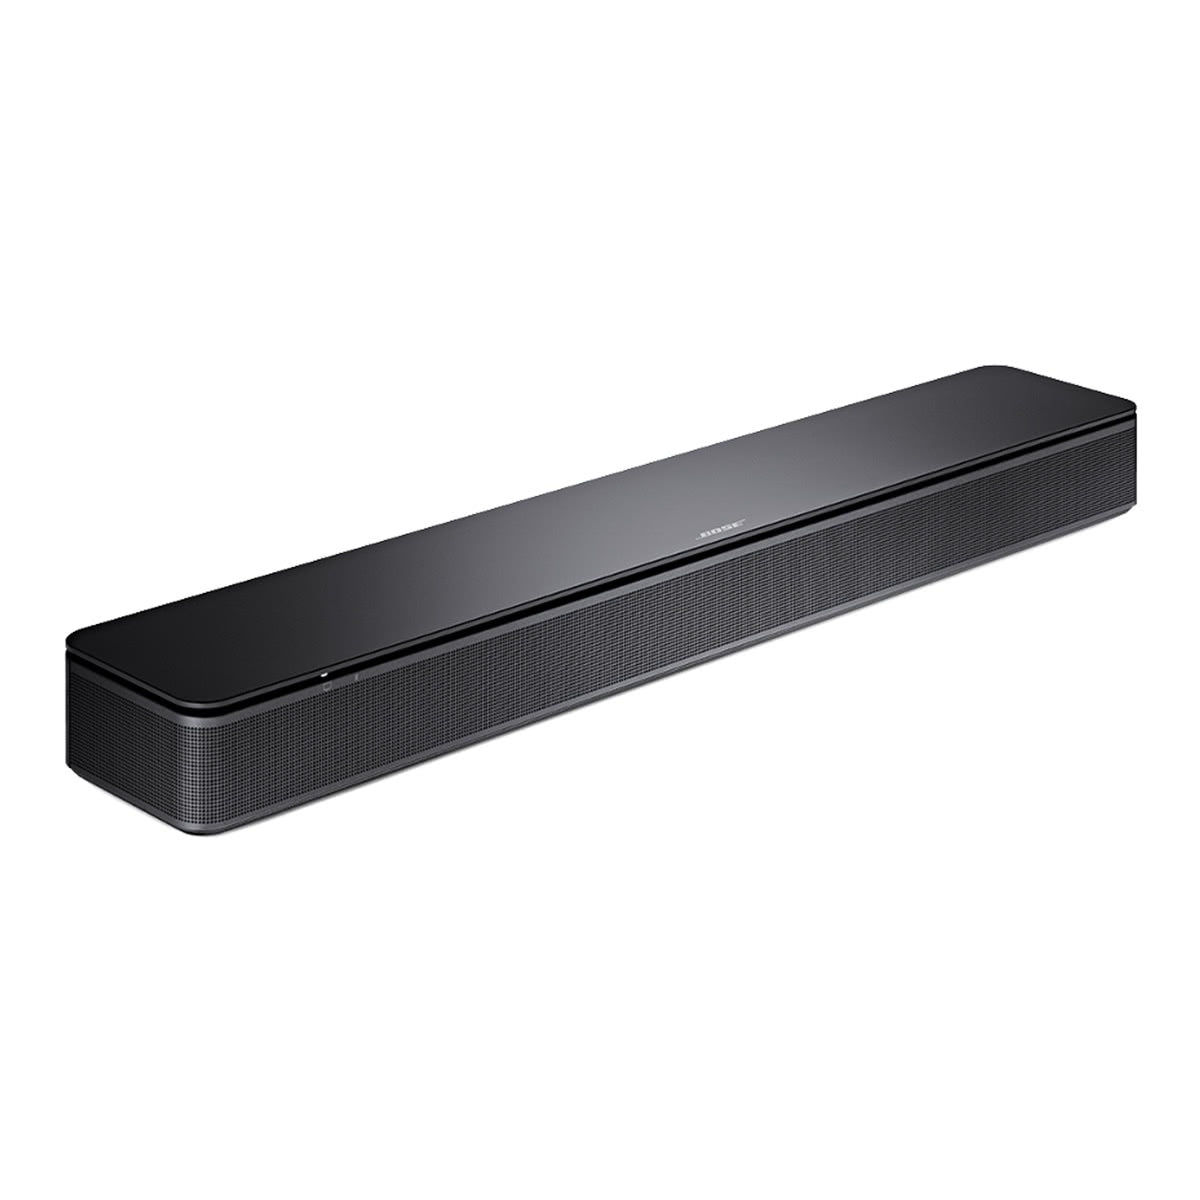 Bose TV Speaker with Bluetooth and HDMI-ARC (Black) | World Wide